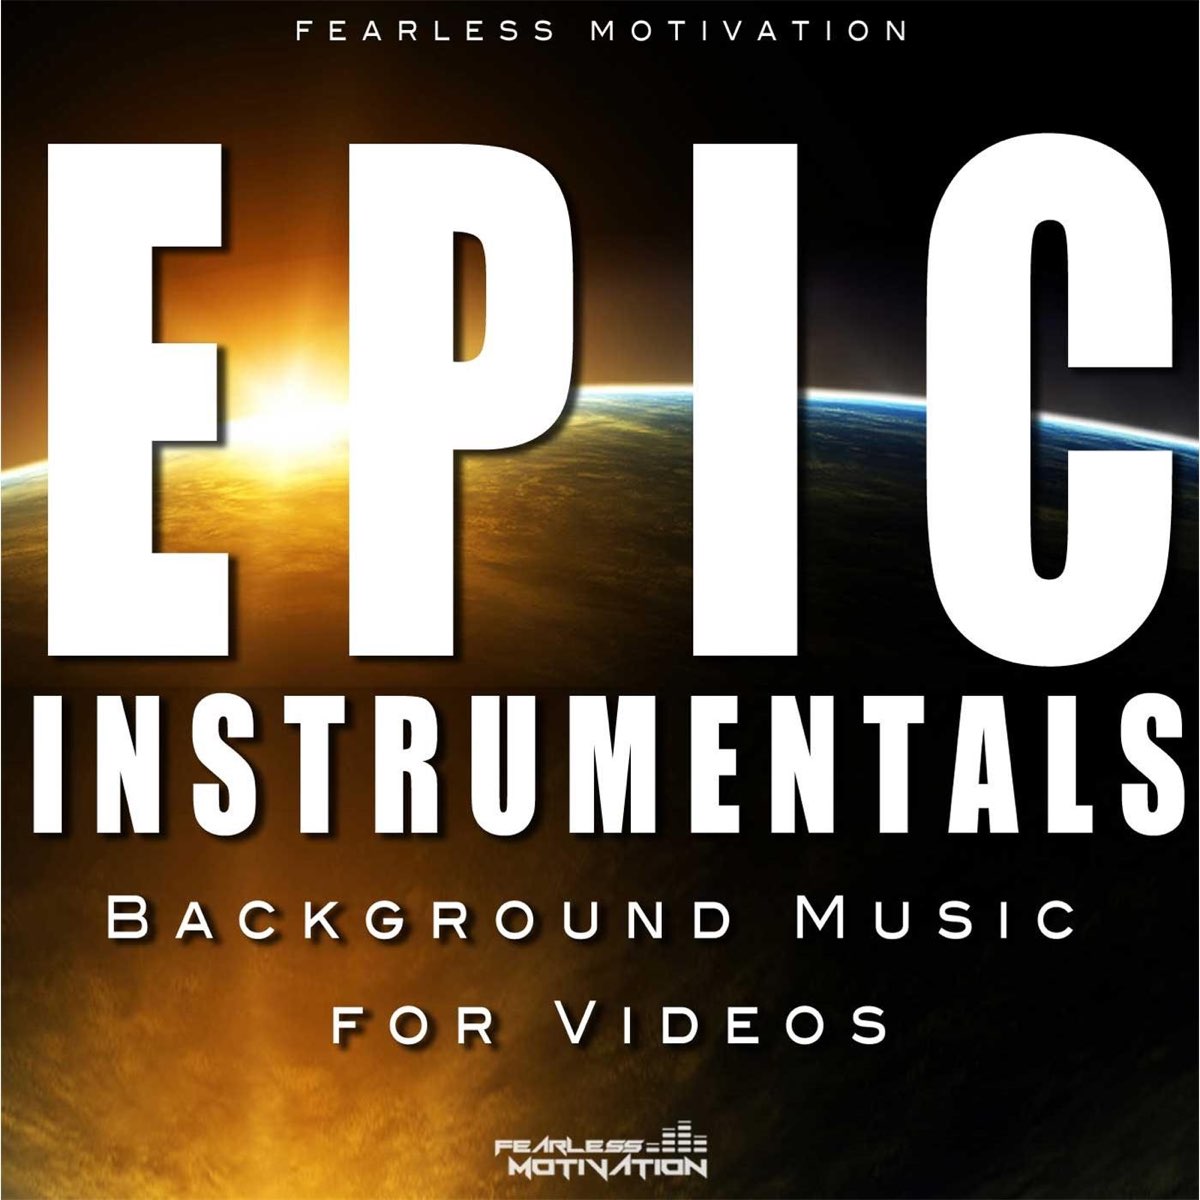 Epic Instrumentals (Background Music for Videos) by Fearless Motivation on  Apple Music